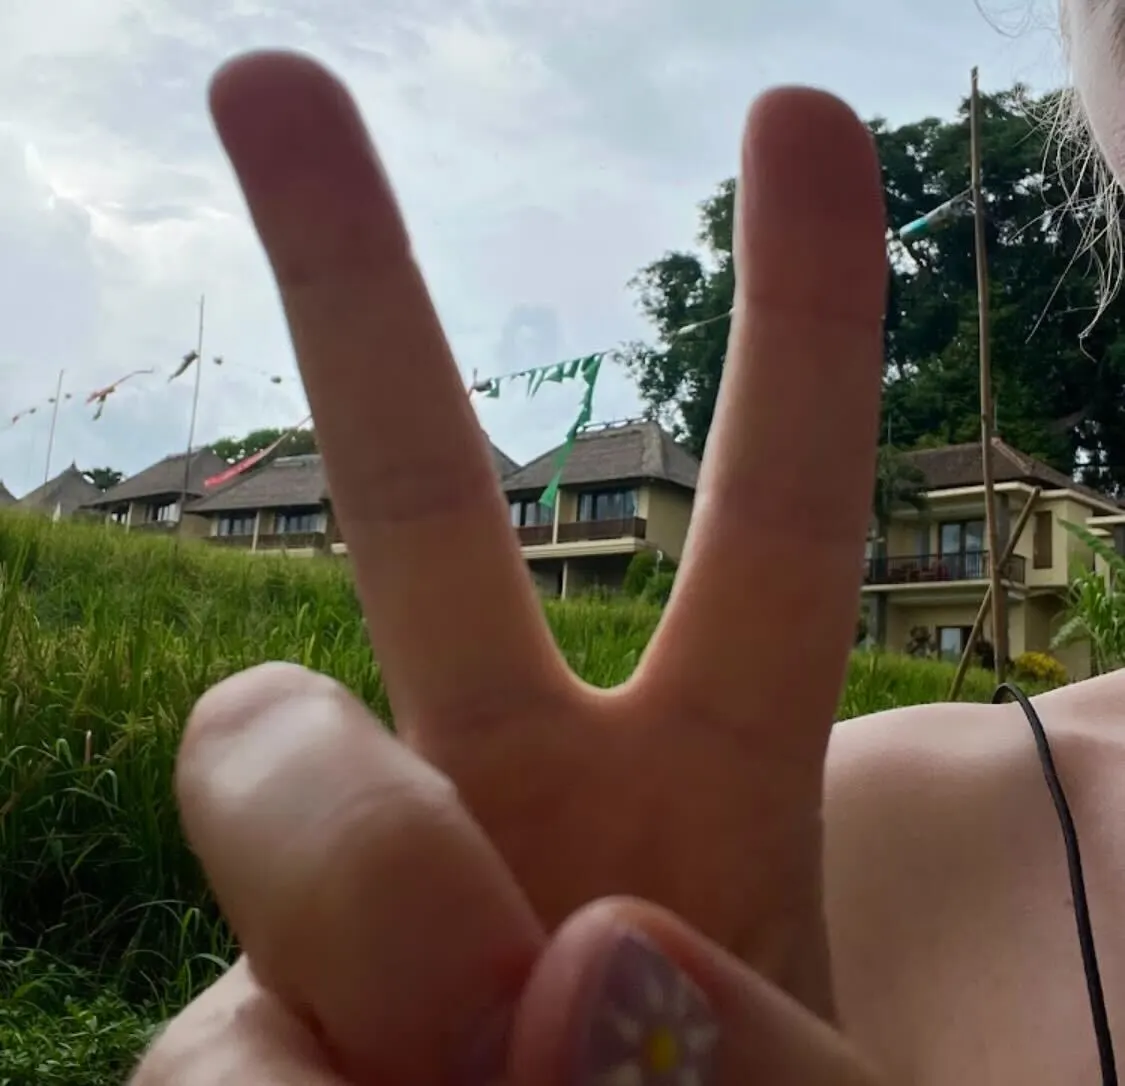 Girl doing the peace sign in Bali.